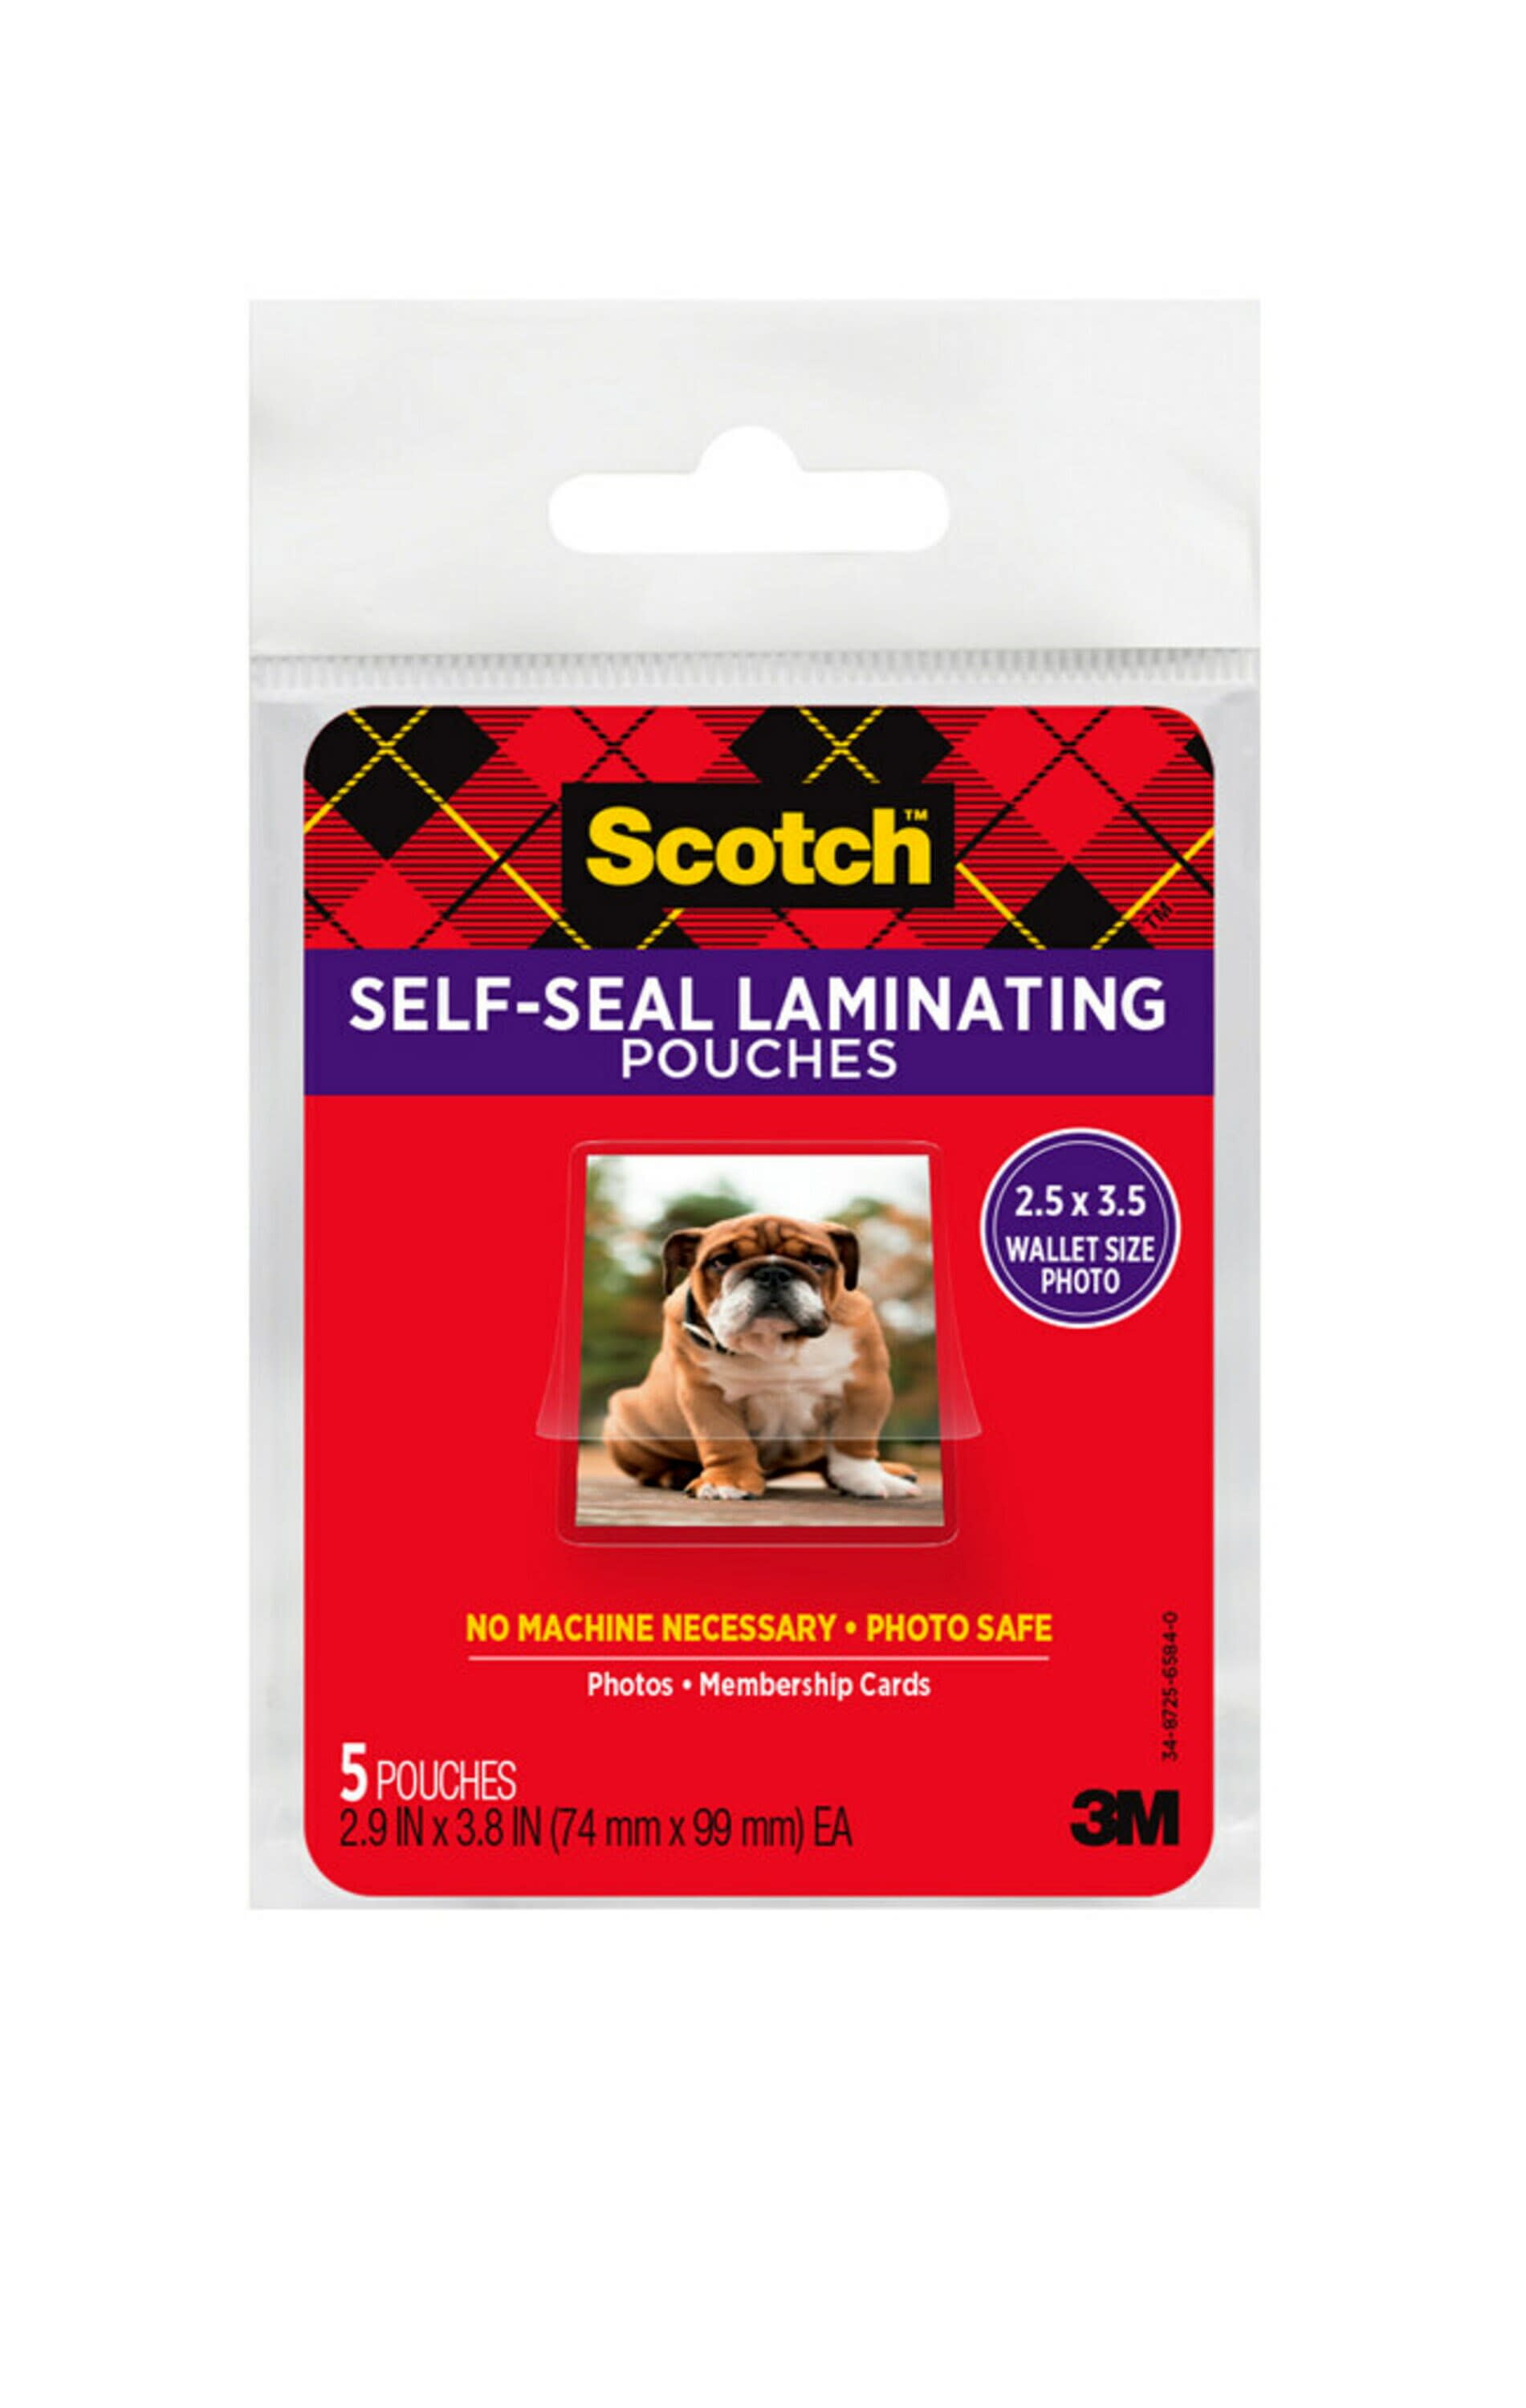 6 Packs of 5 Pouches 30 Pouches Total Wallet Size 2.5 Inches x 3.5 Inches PL903G Scotch Self-Sealing Laminating Pouches 